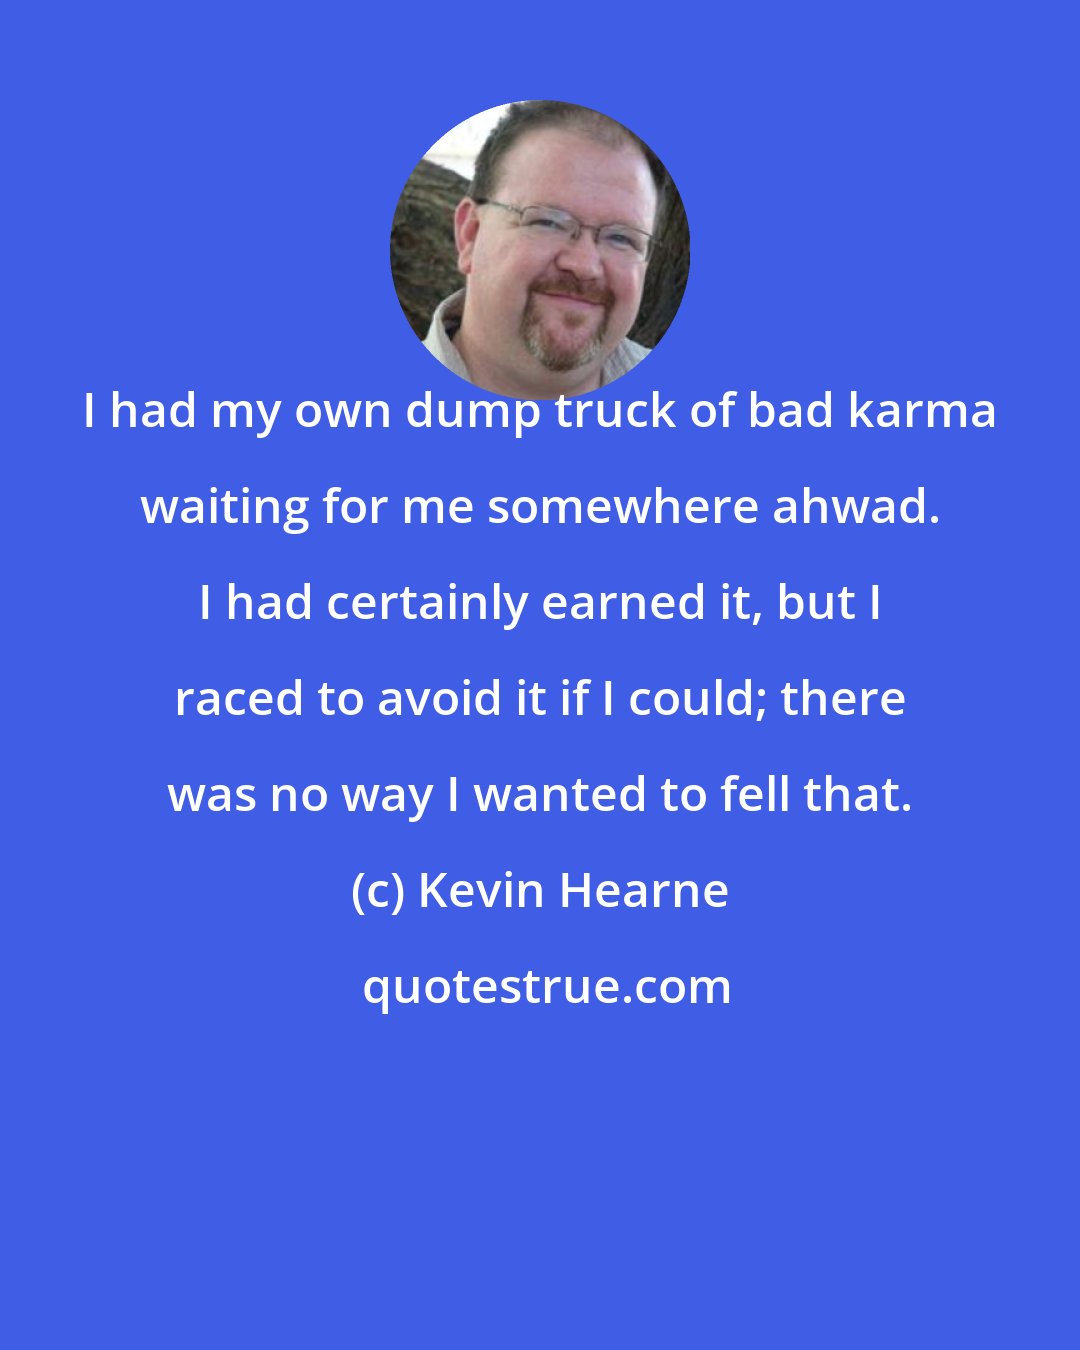 Kevin Hearne: I had my own dump truck of bad karma waiting for me somewhere ahwad. I had certainly earned it, but I raced to avoid it if I could; there was no way I wanted to fell that.